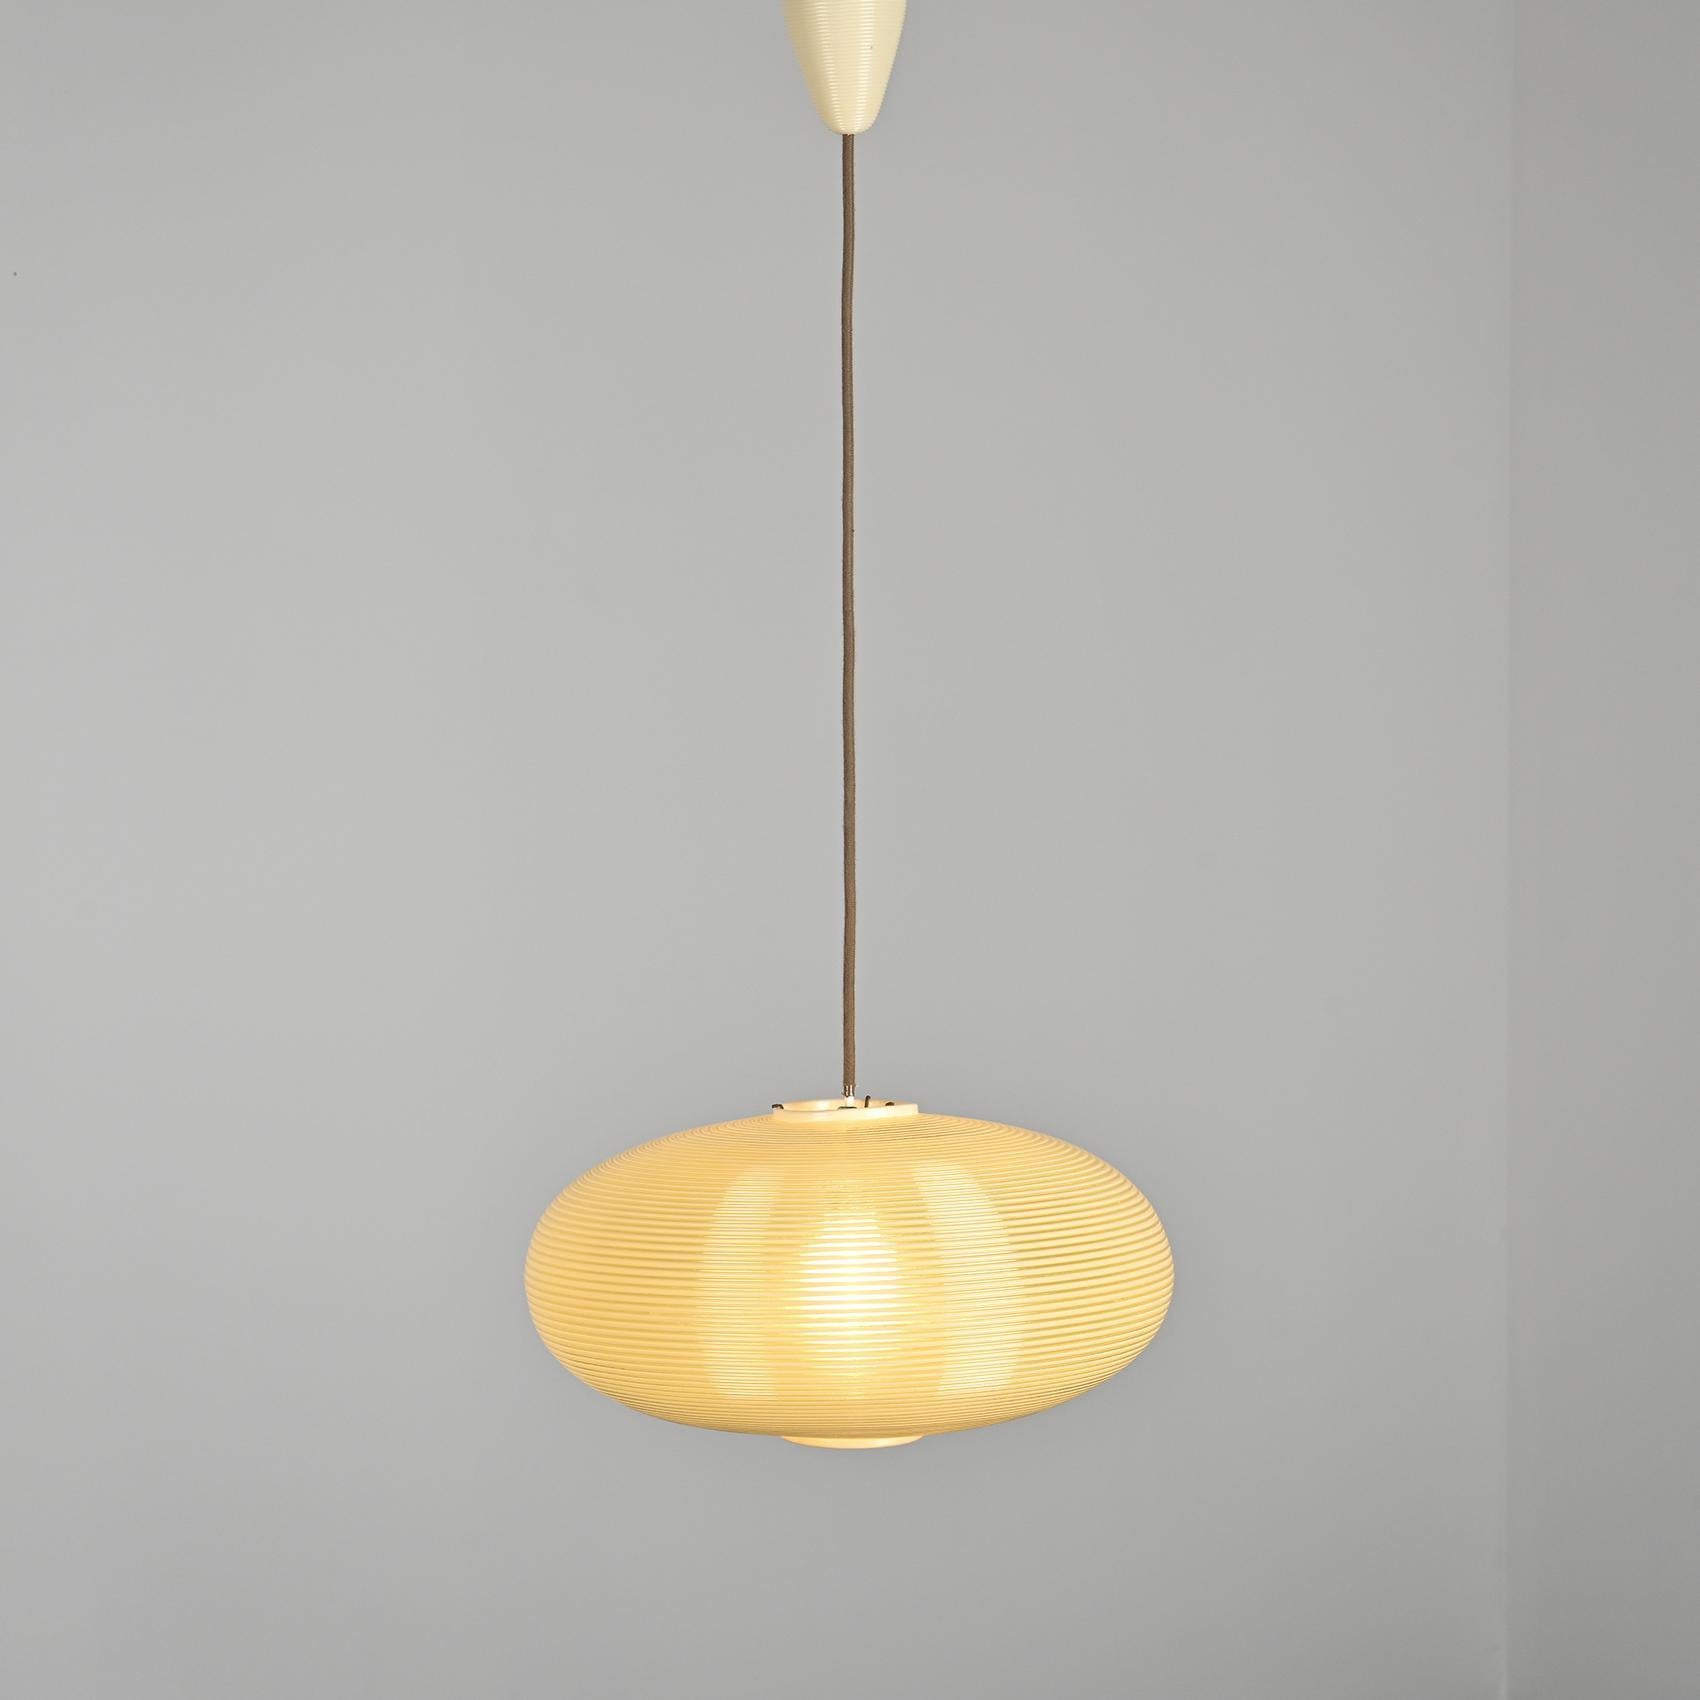 A large Rotaflex pendant light composed of a single flattened, ivory-colored round piece, including its bale cover, dating back to the 1960s.

The material used in crafting this pendant light is Rotaflex, an innovative plastic substance formed from